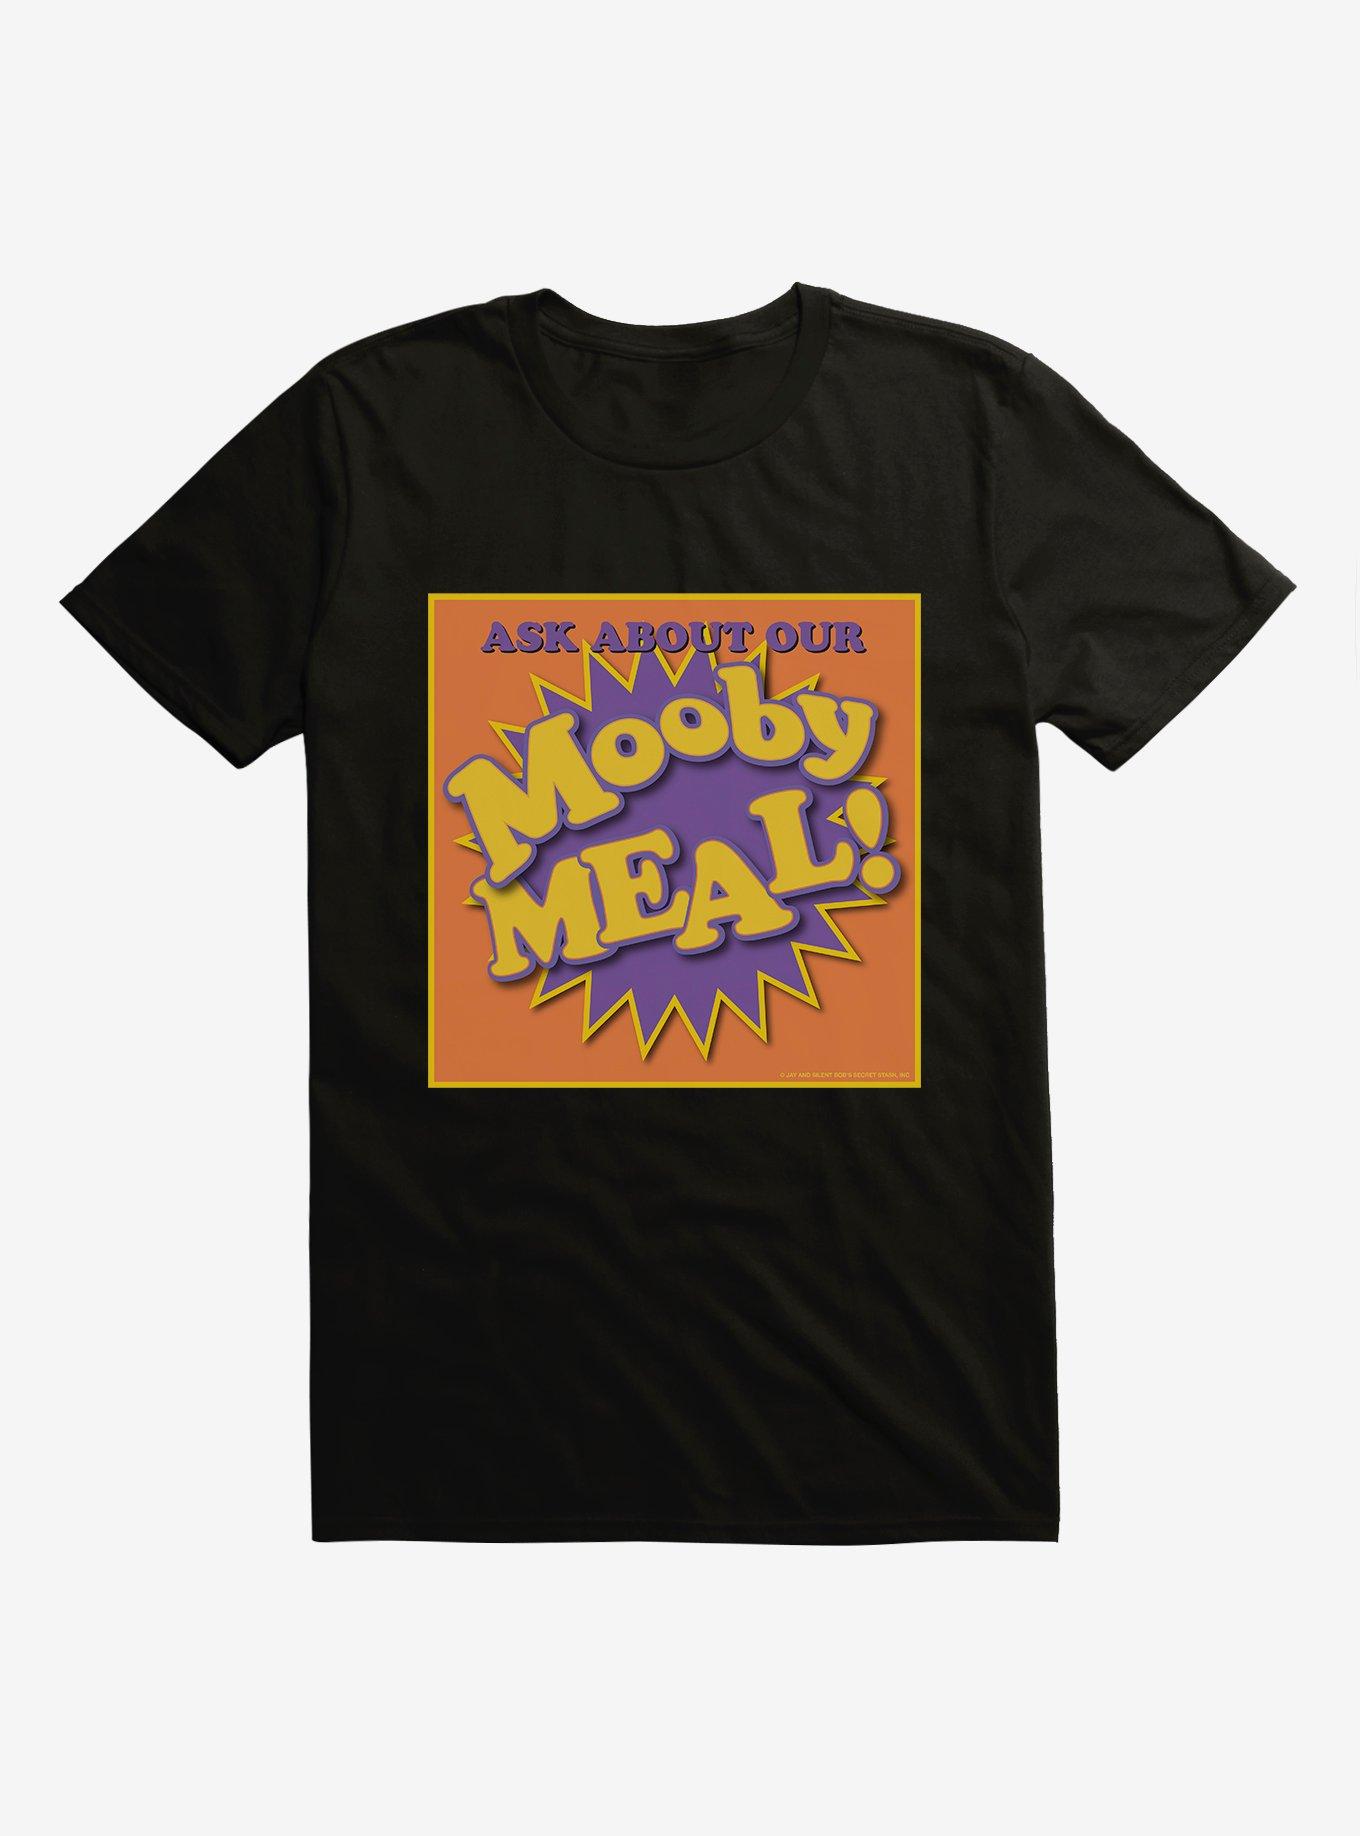 Jay And Silent Bob Reboot Ask About Your Mooby Meal T-Shirt, BLACK, hi-res